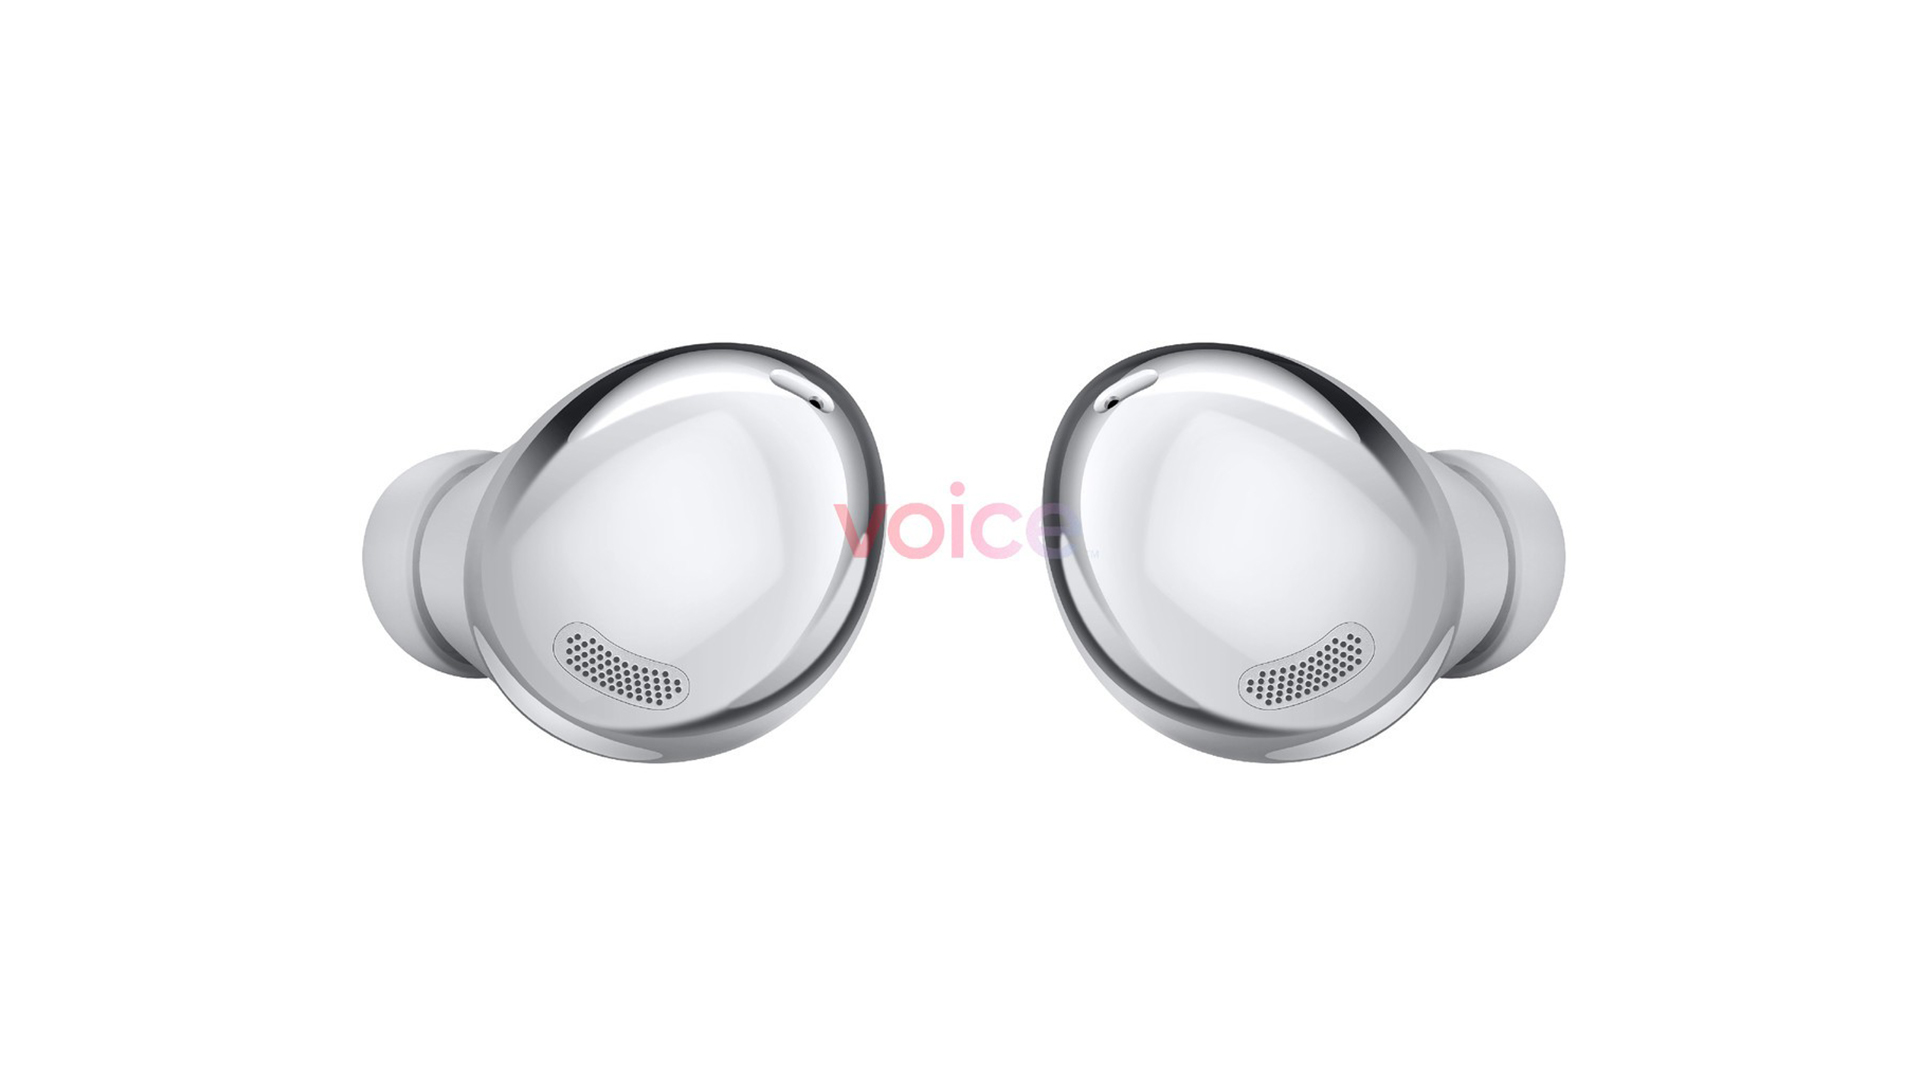 Galaxy Buds Pro remote earbuds now show up in Phantom Silver colorway